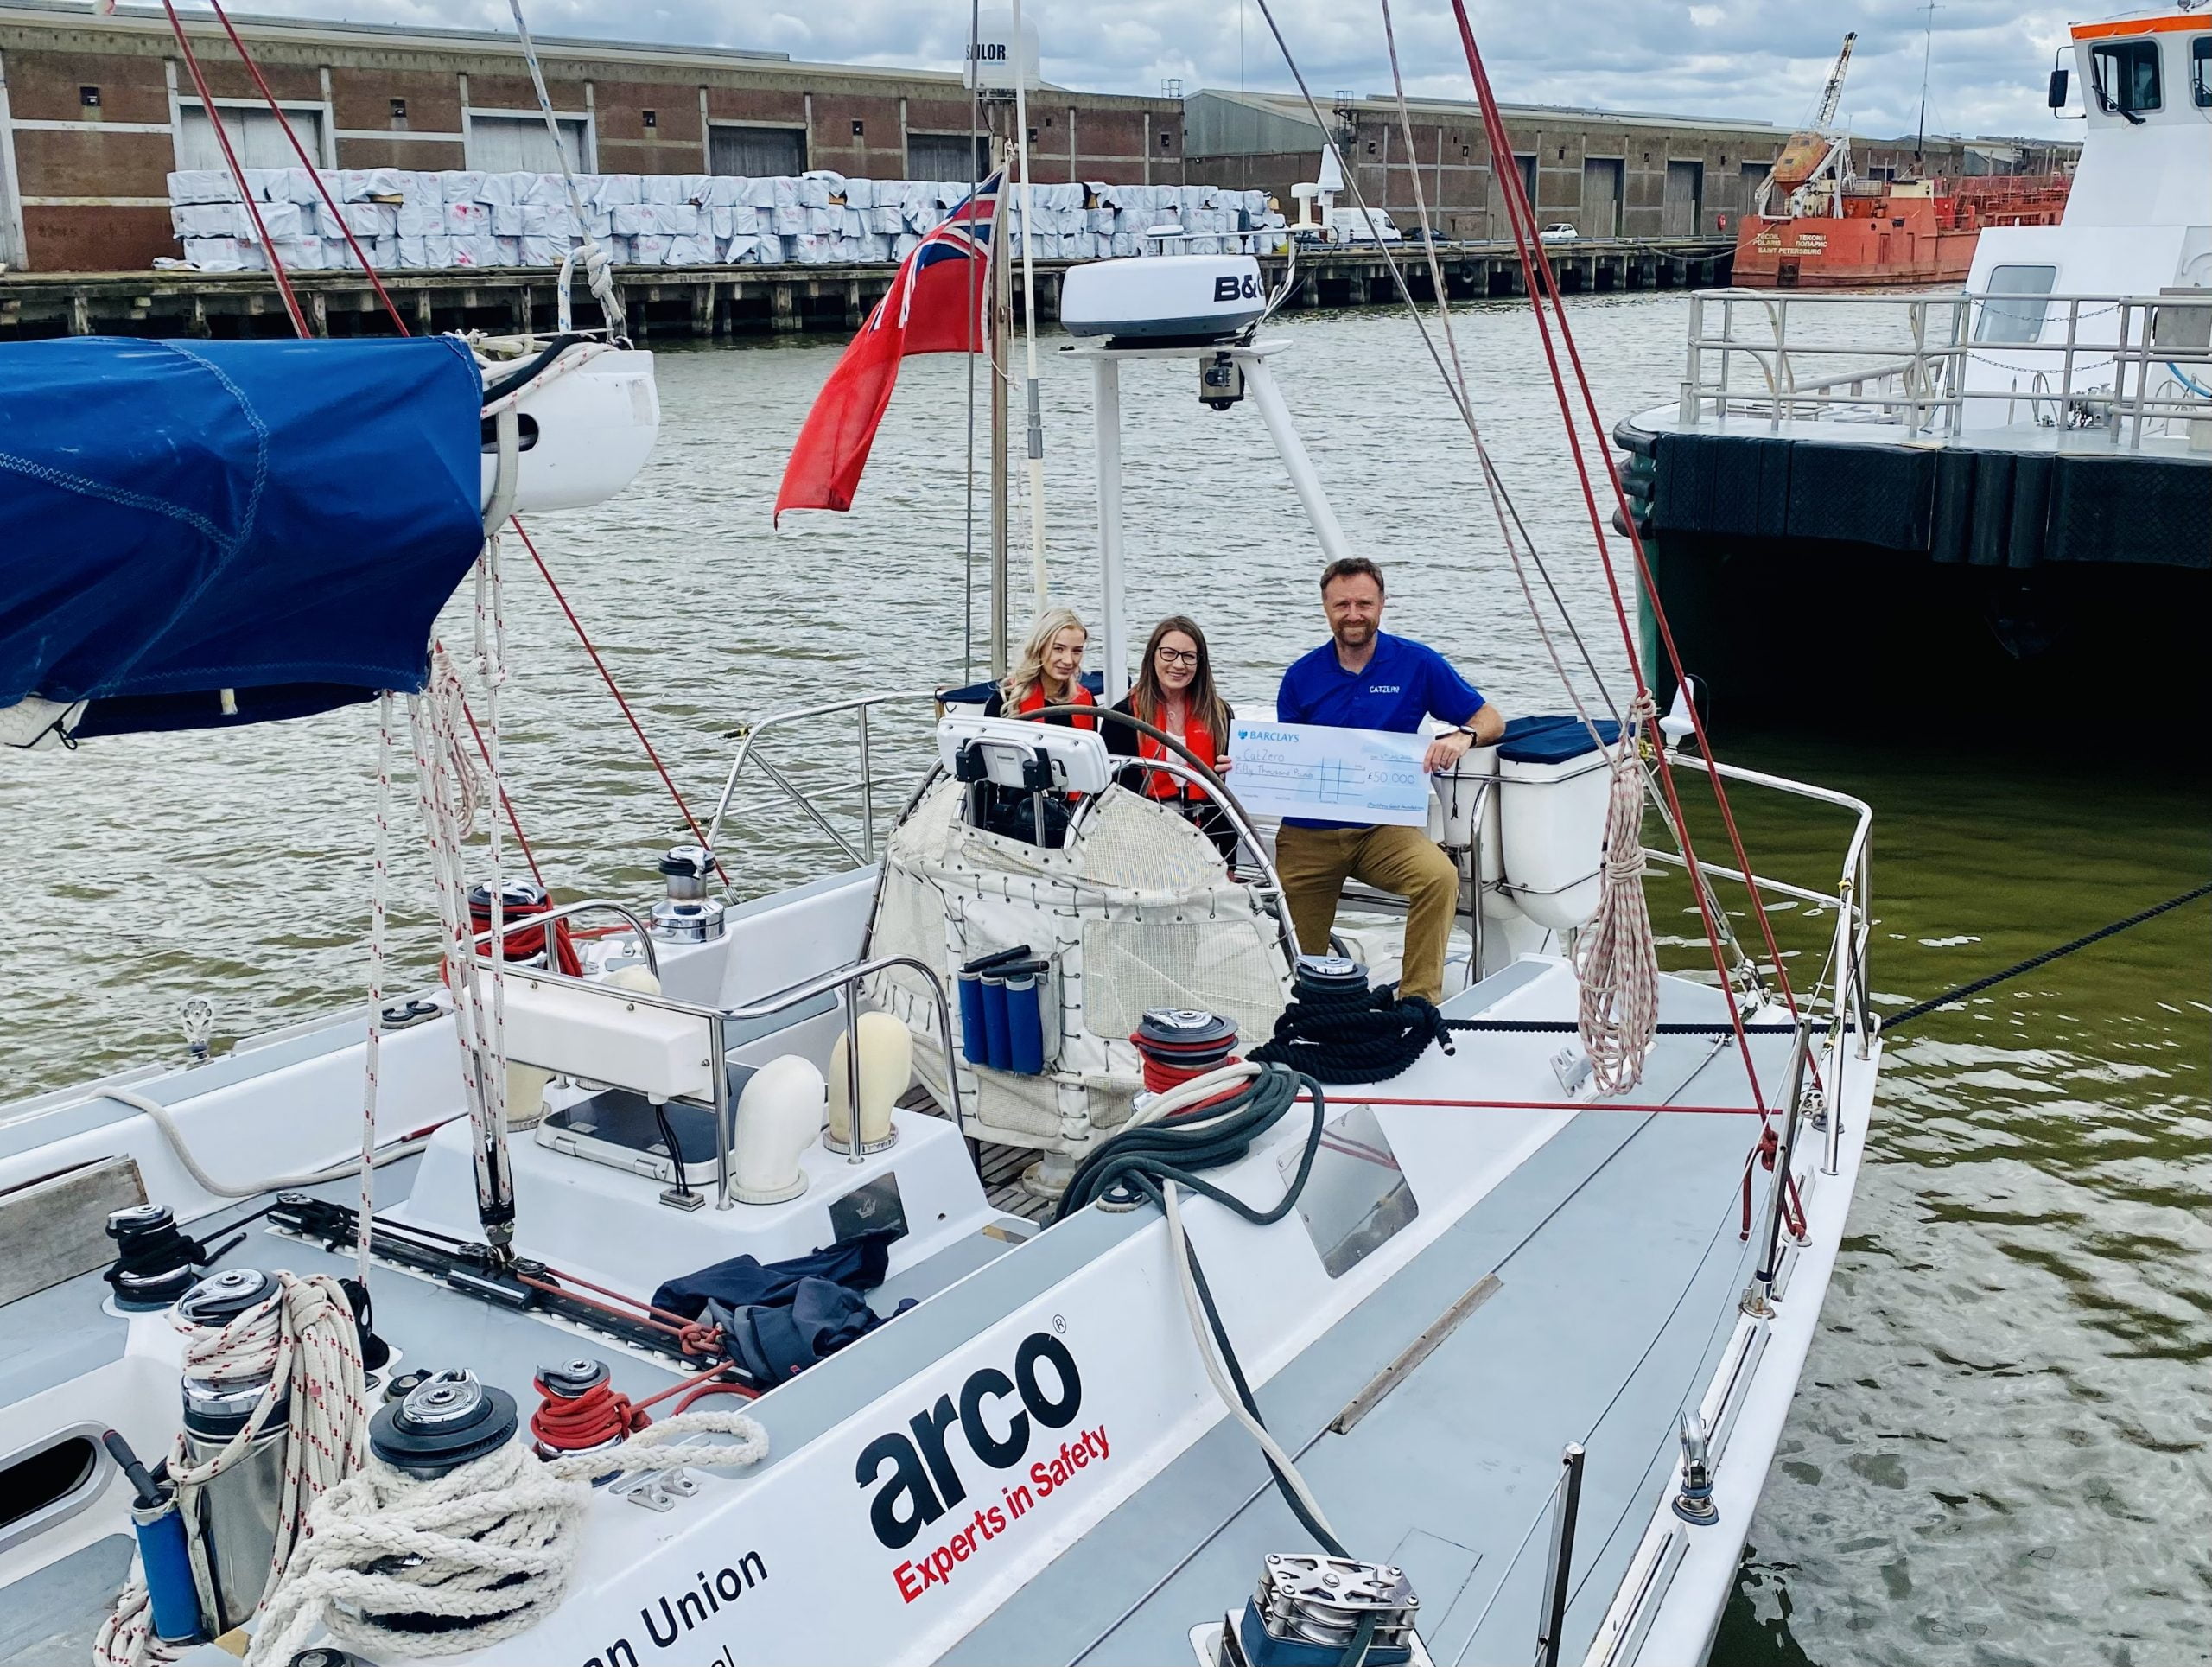 Steph Caley (left) and Michelle Taft (middle) from the Matthew Good Foundation present a £50,000 cheque to Pete Tighe (right) aboard the CatZero yacht.